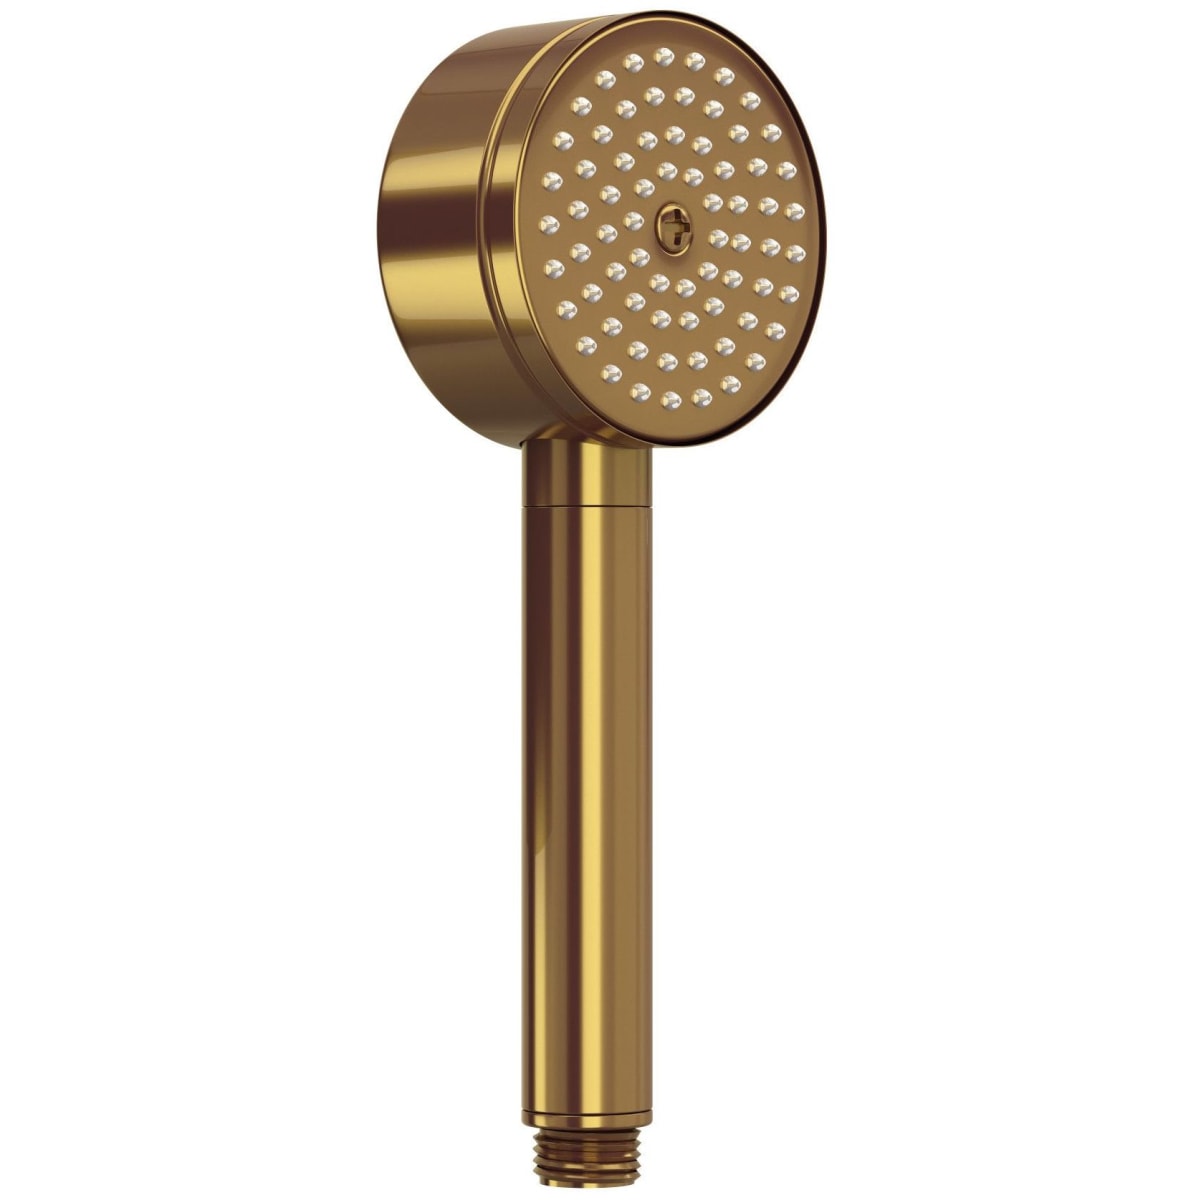 ROHL Handshower Holder with Outlet for Shower Arm Connection